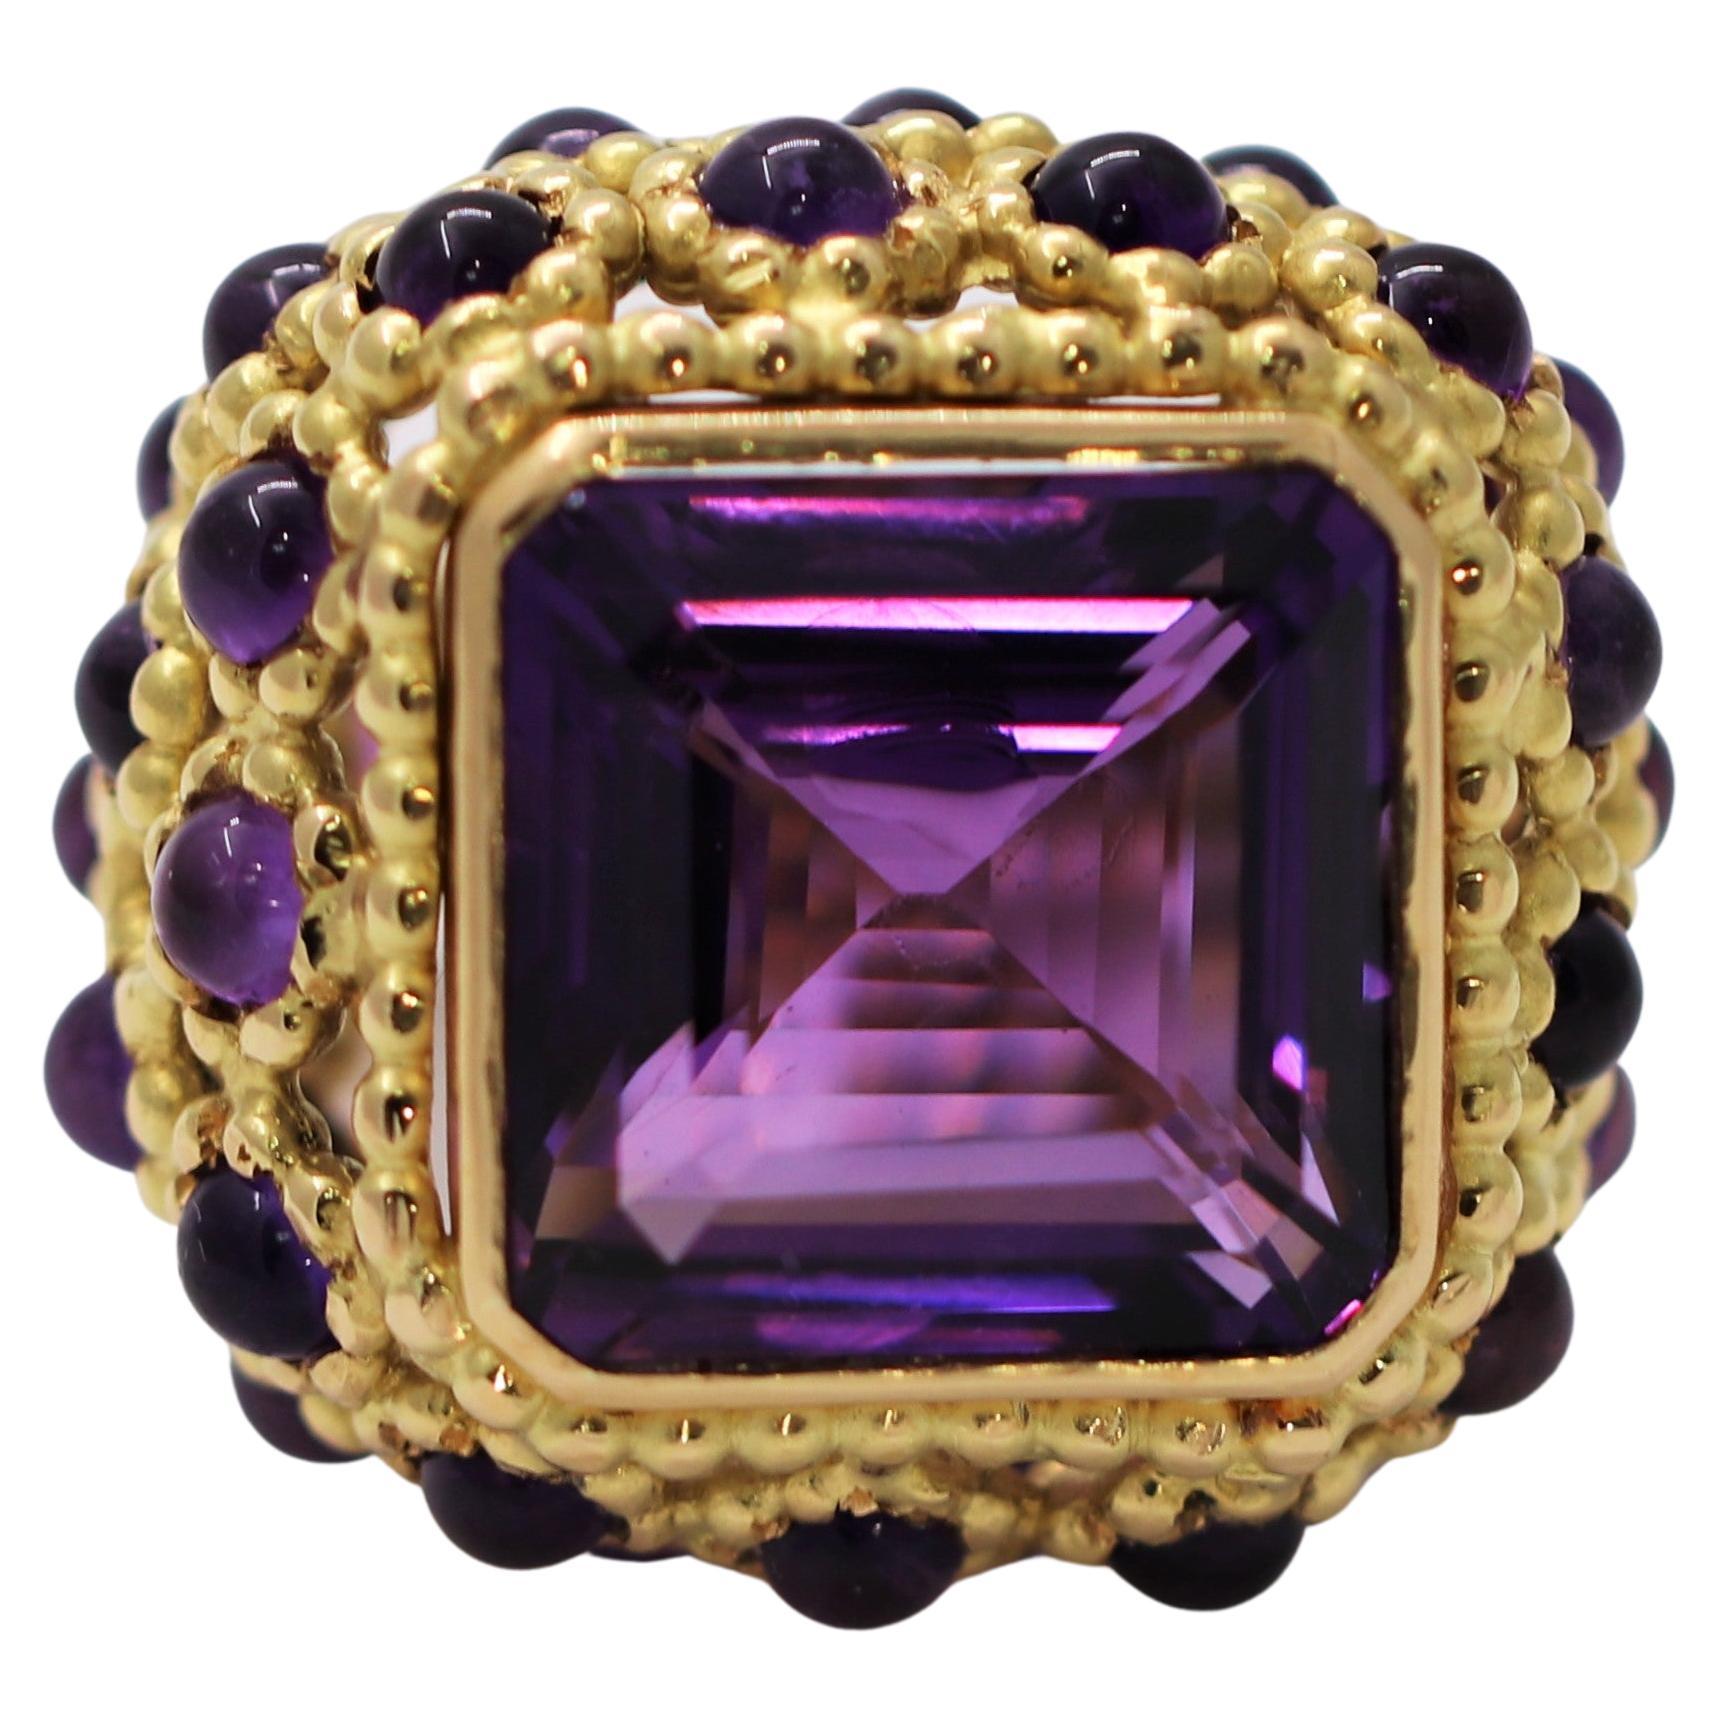 Elegant Grand Scale French Mid-20th Century 18k Gold and Amethyst Fashion Ring For Sale